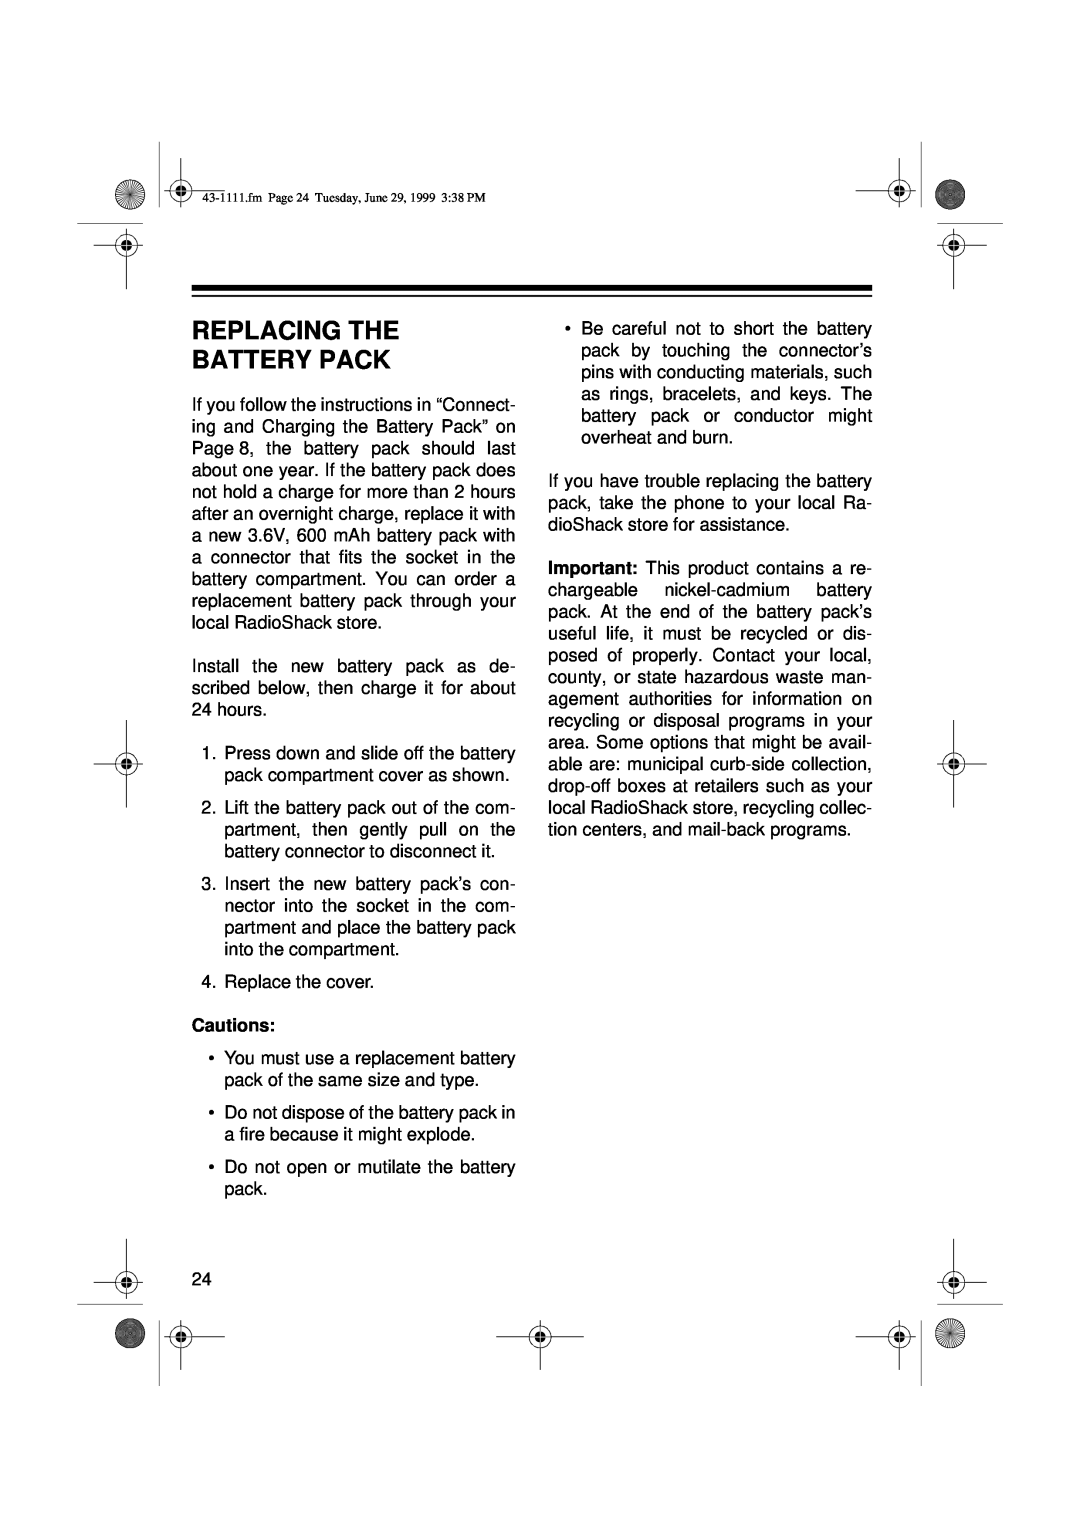 Radio Shack ET-1111 owner manual Replacing The Battery Pack, Cautions 